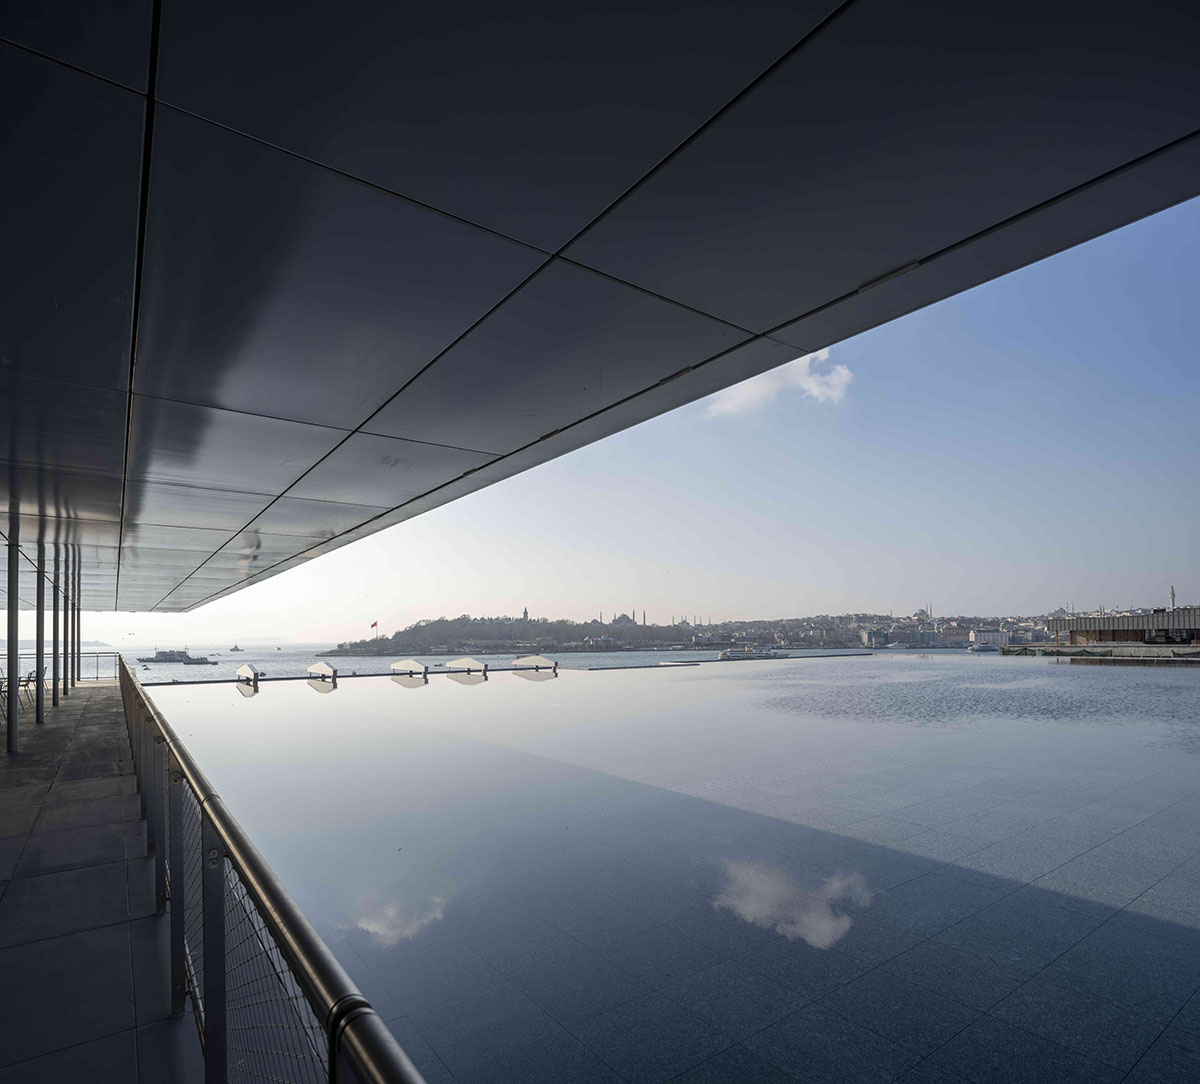 Renzo Piano's first project in Türkiye, Istanbul Modern to open on May 4 